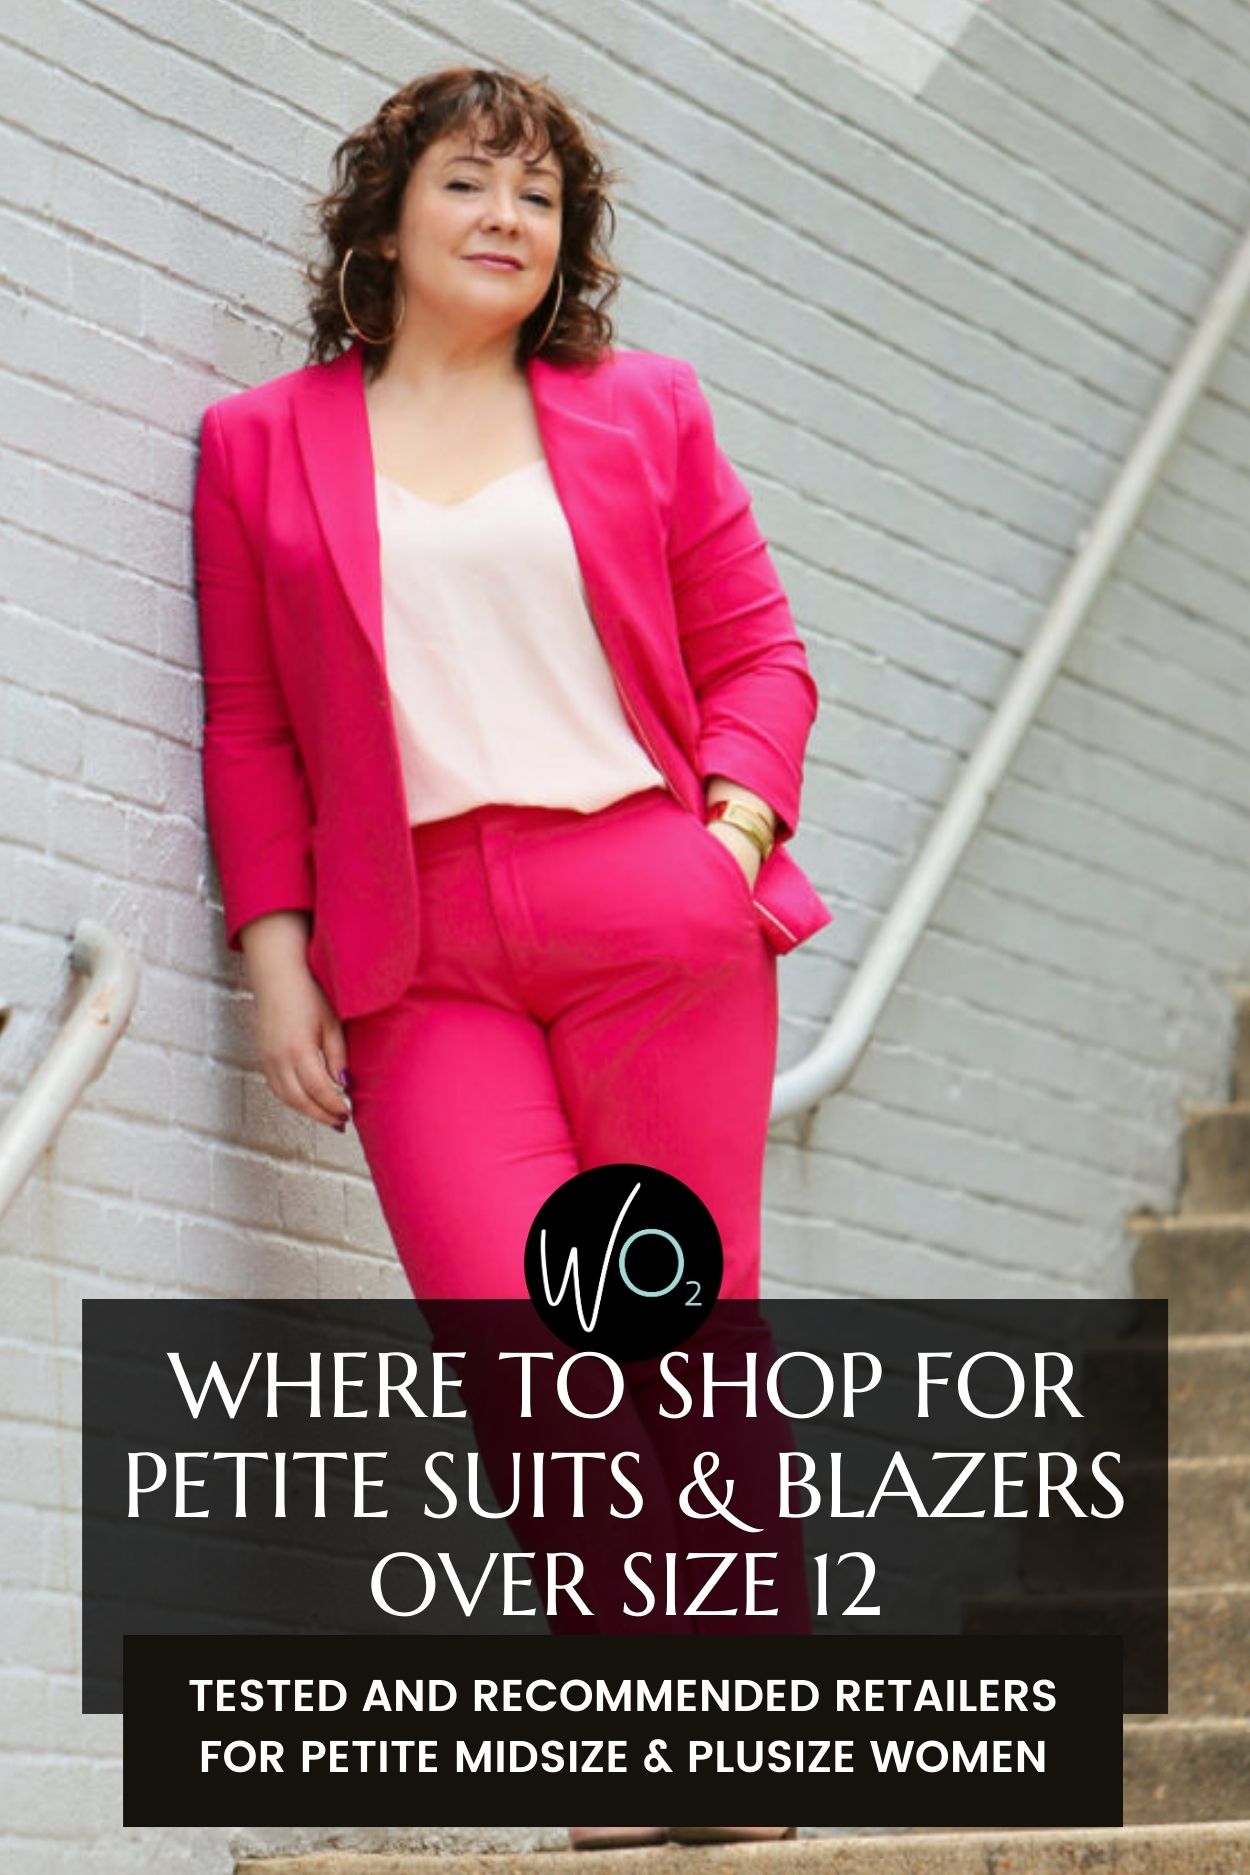 14 Stores That Sell Petite Suits over Size 12